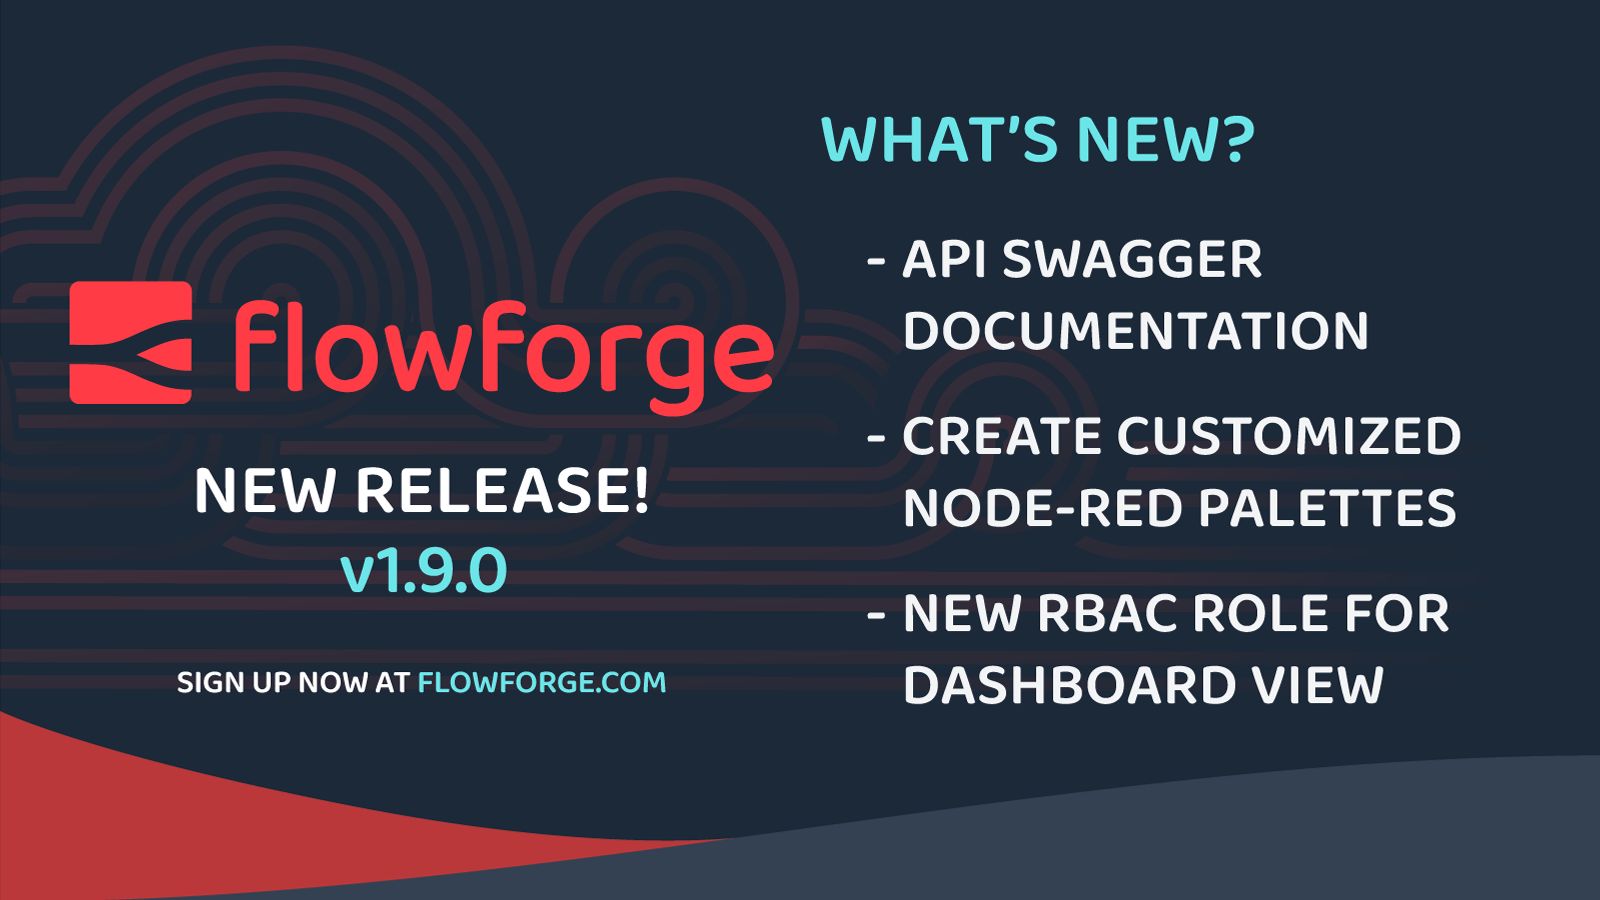 Image representing FlowFuse now offers API Documentation with Swagger UI